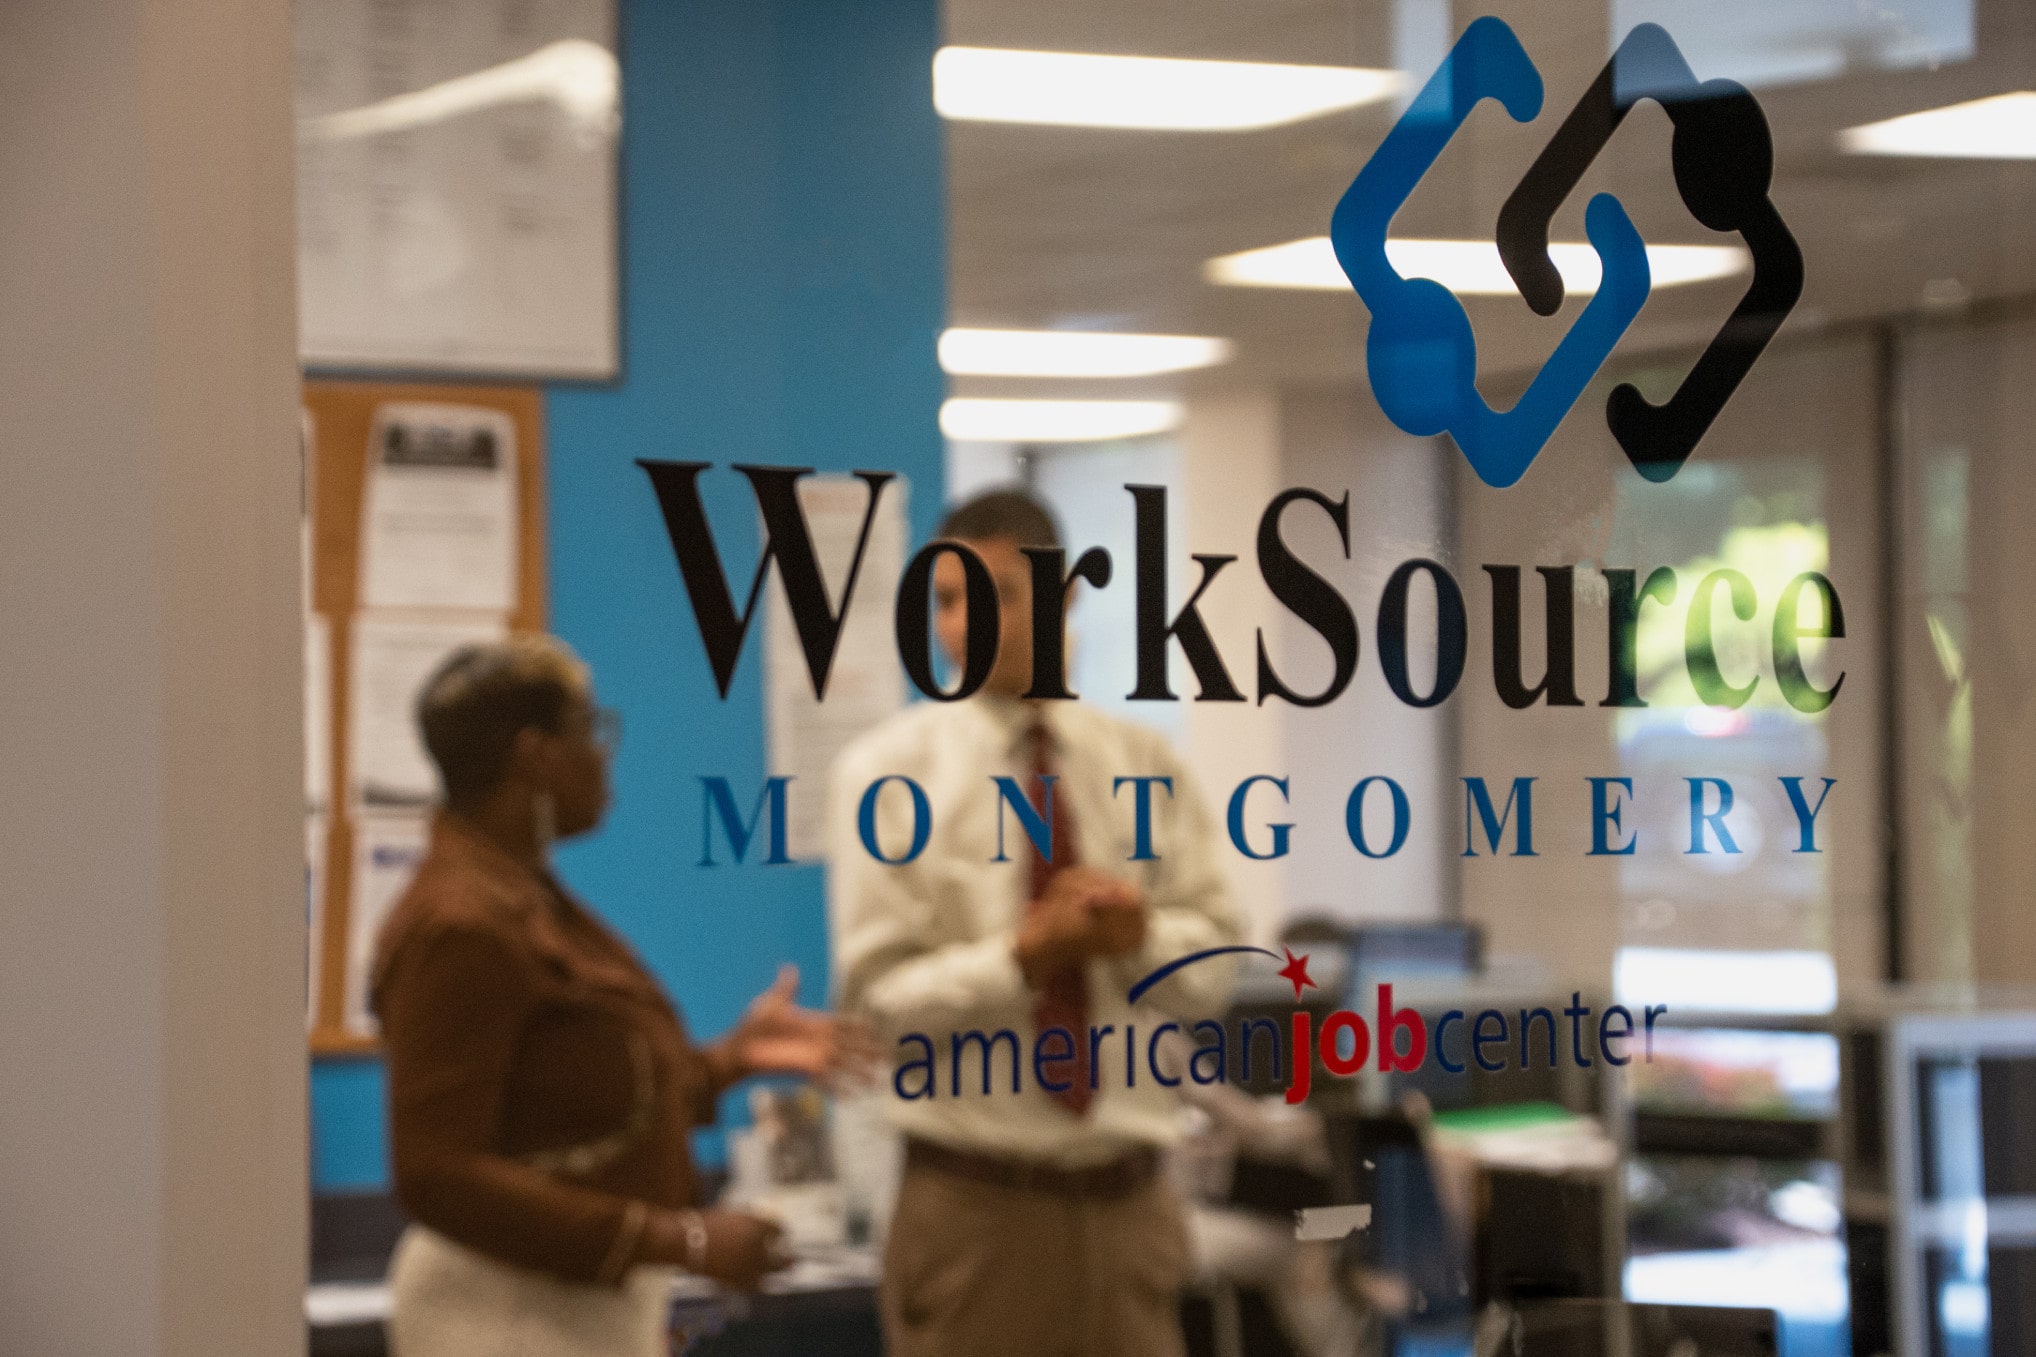 WorkSource Montgomery Launches Search for One-Stop Operator to Coordinate Service-Delivery, Under Federal Workforce Innovation & Opportunity Act (WIOA)